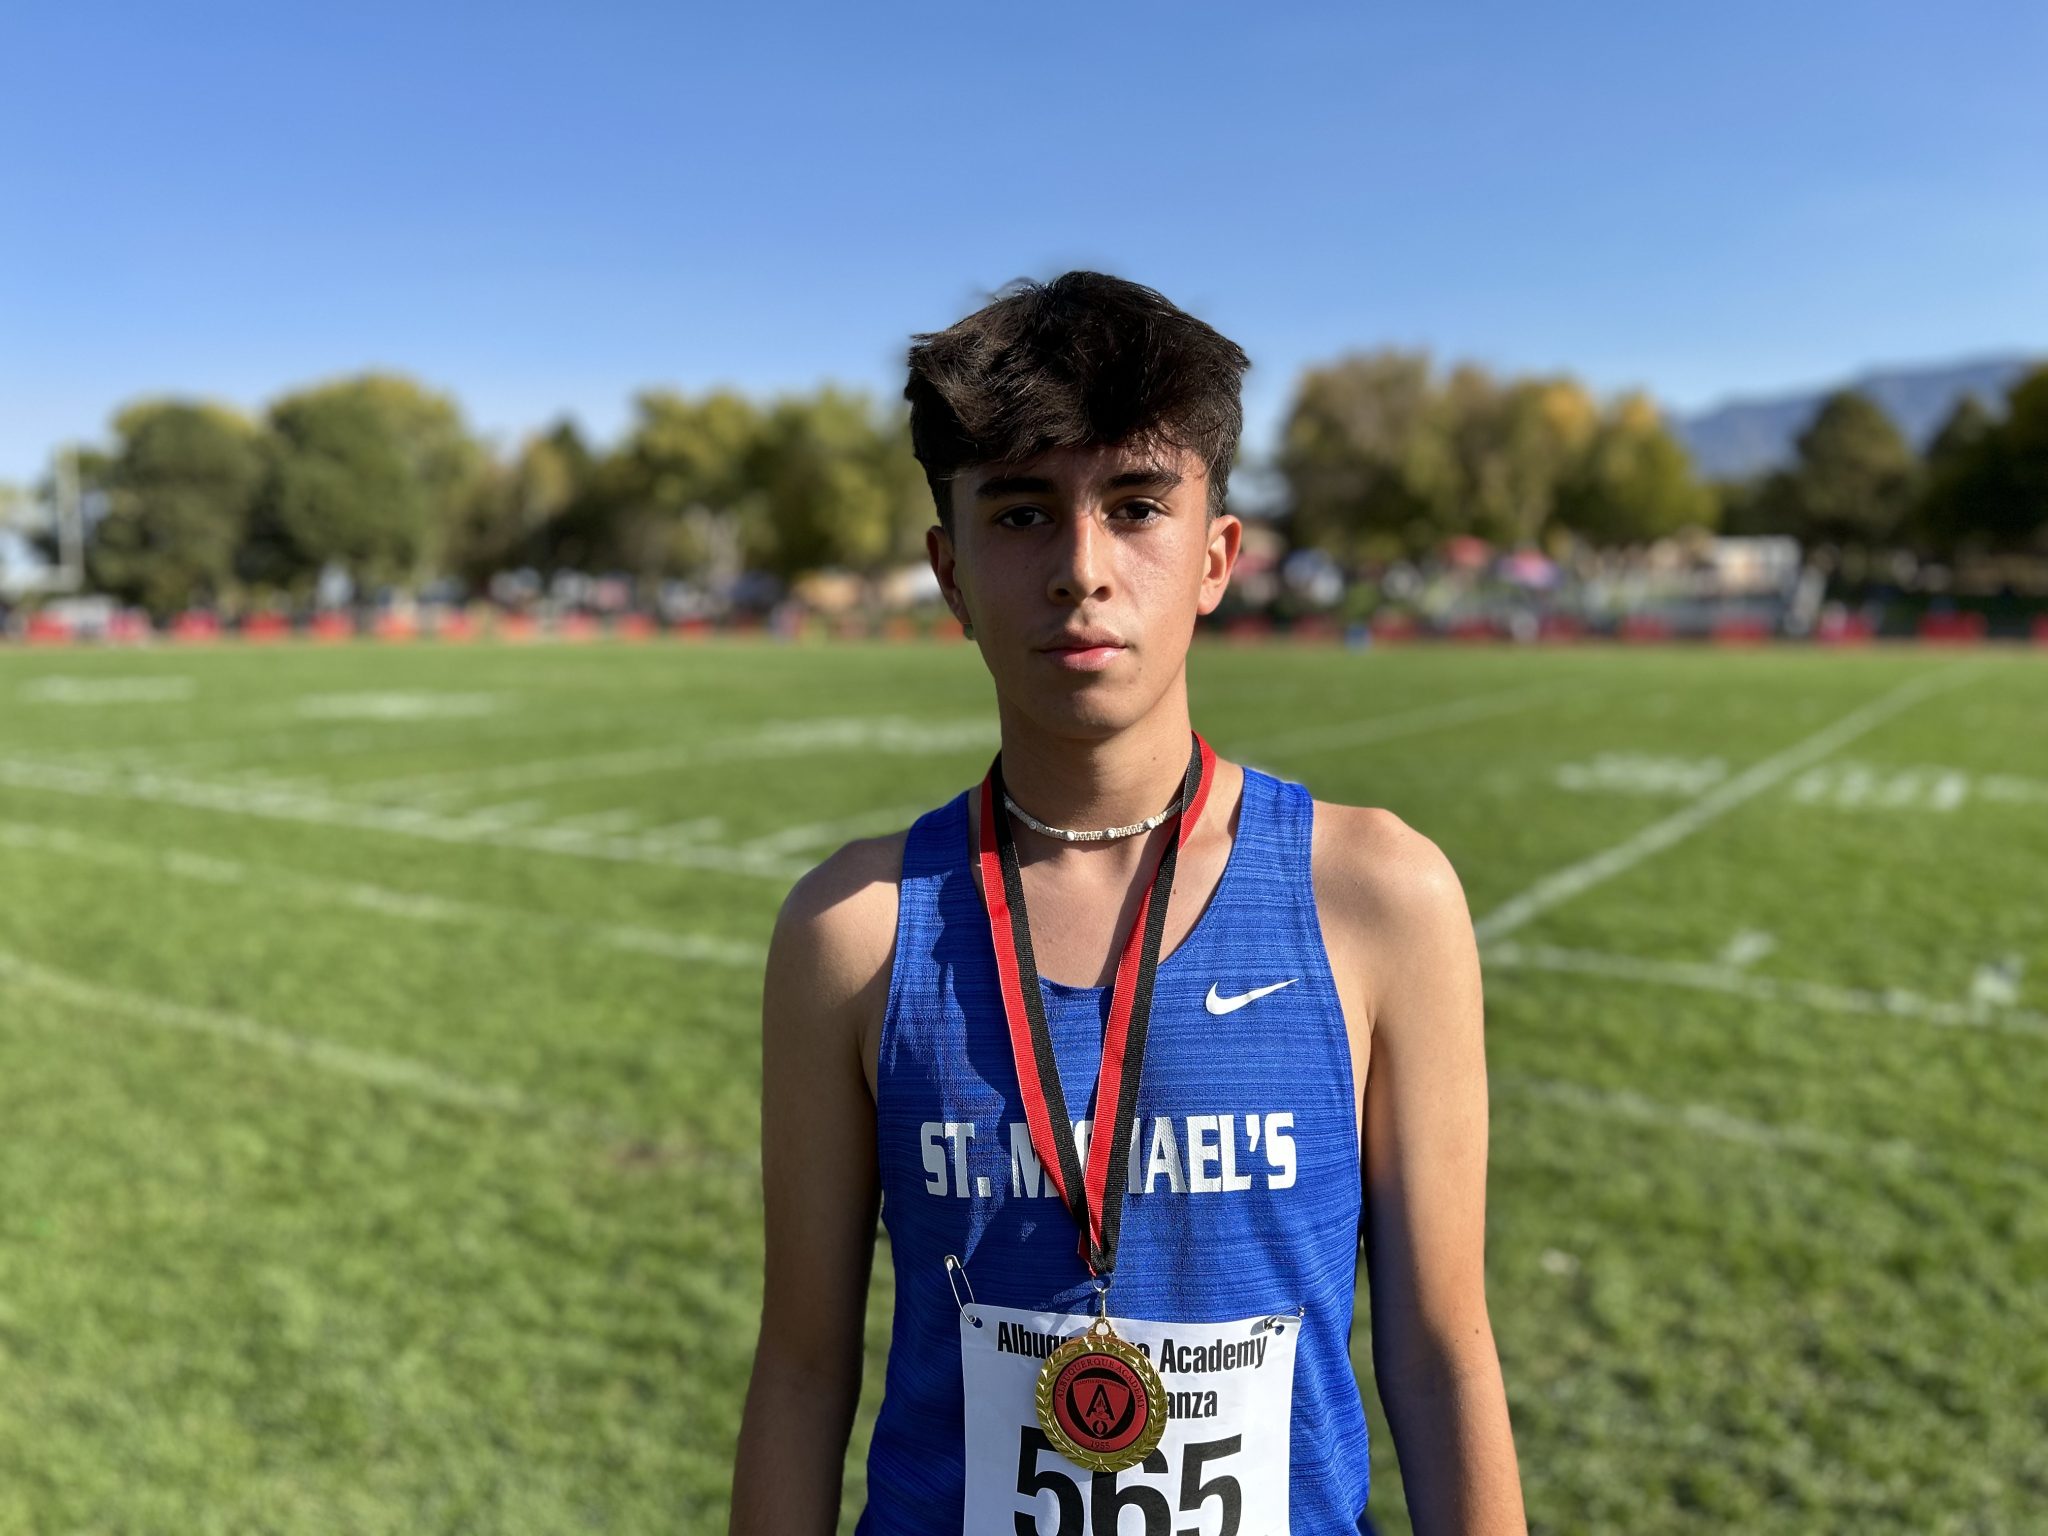 ALBUQUERQUE ACADEMY CROSS COUNTRY EXTRAVAGANZA HIGHLIGHTS AND RESULTS